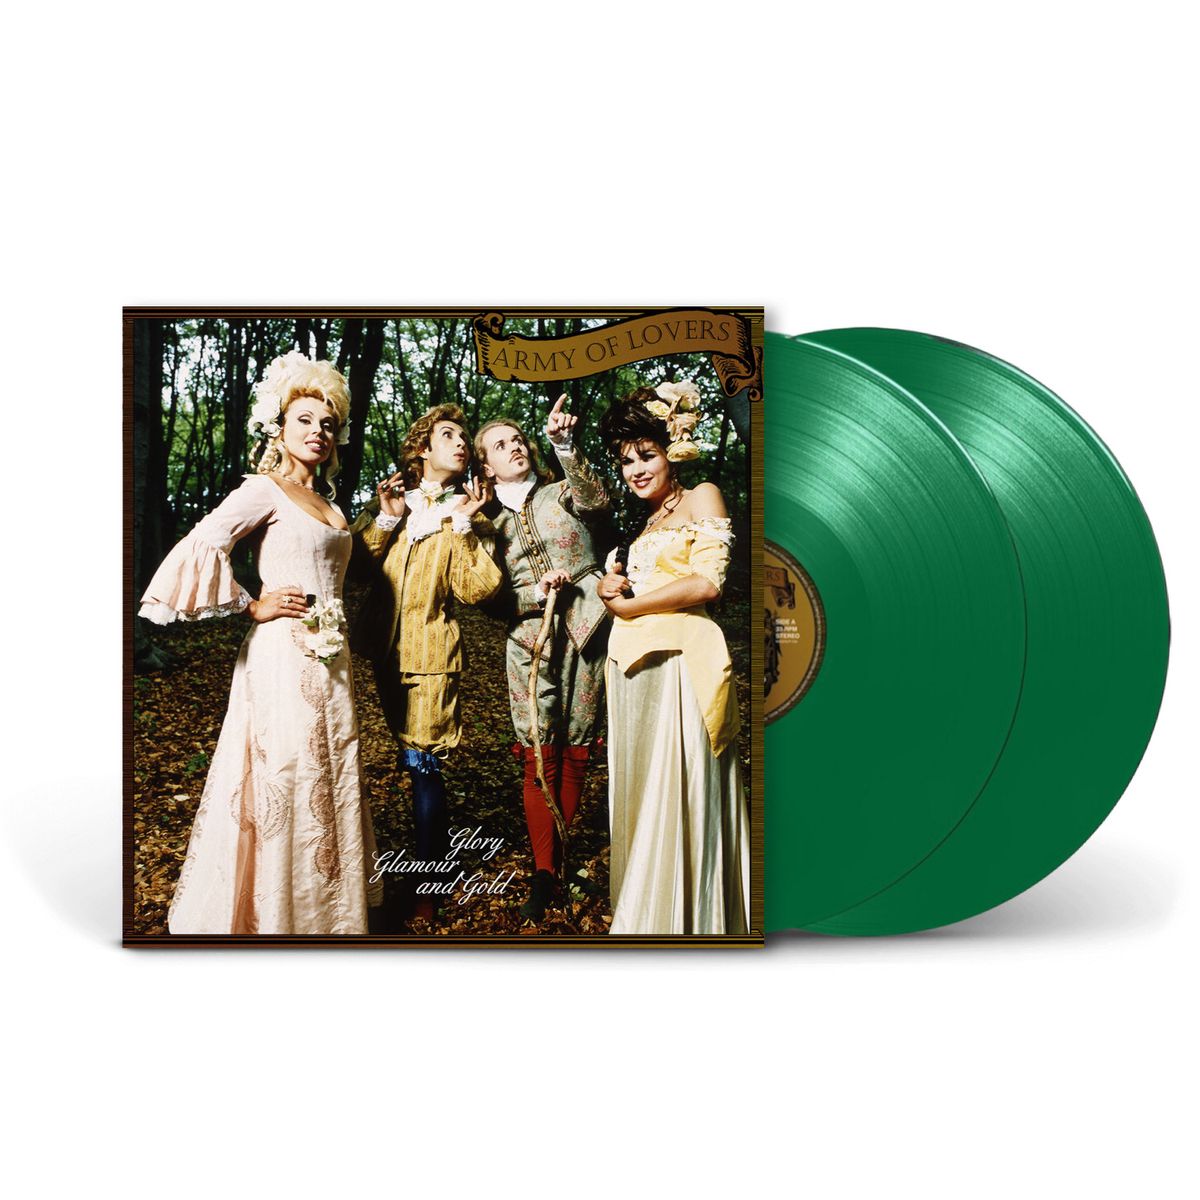 Виниловые пластинки 2LP: Army Of Lovers — «Glory Glamor And Gold» (1994/1996) [Ultimate Edition Limited Green Vinyl]